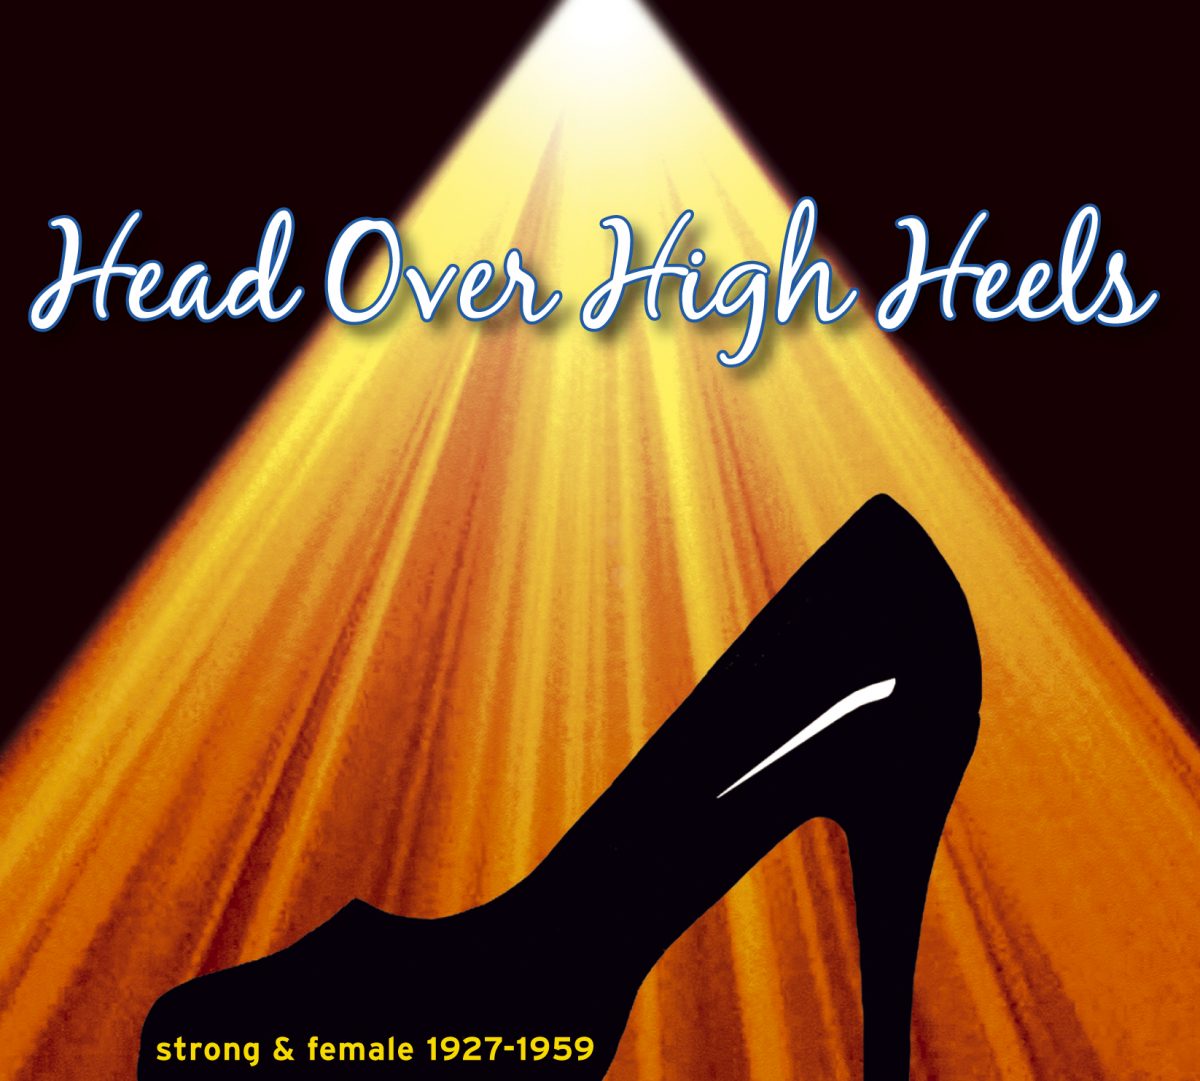 Head Over High Heels - Strong & Female 1927 - 1959